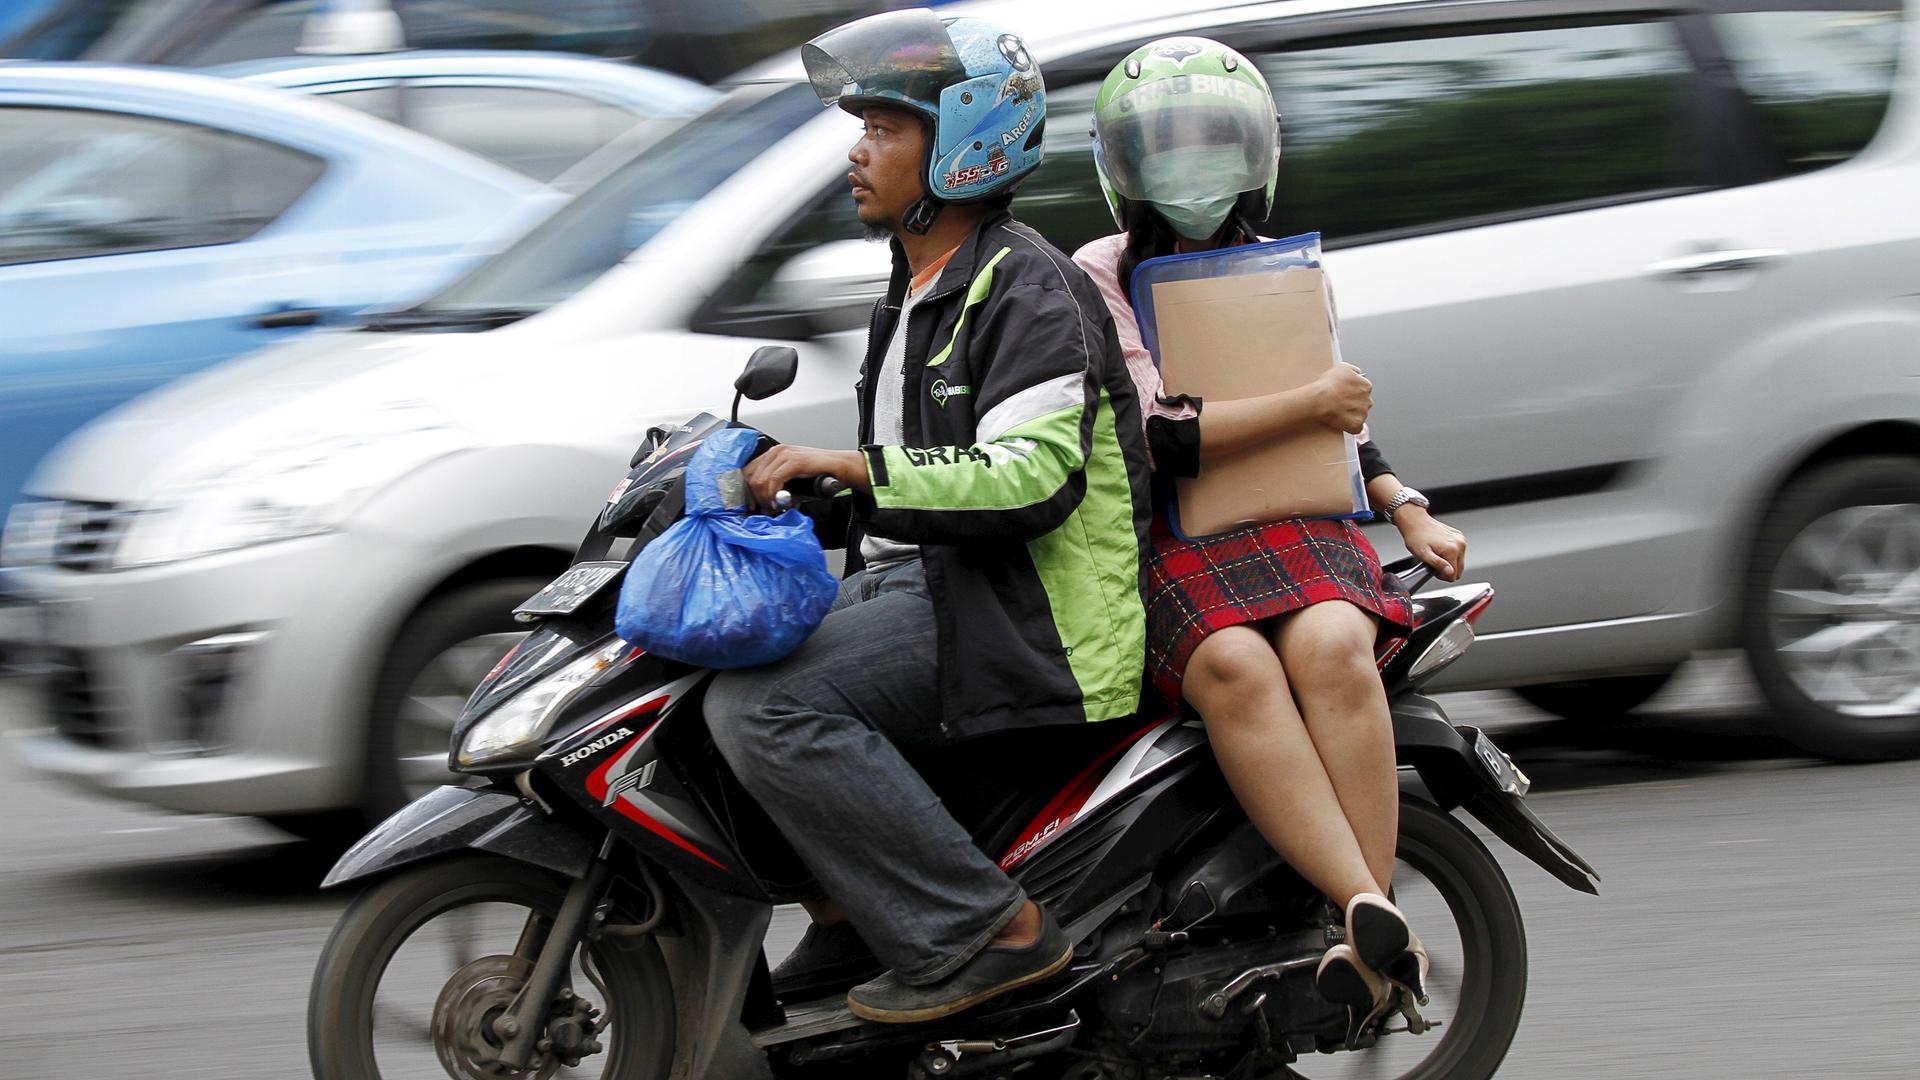 A woman rides on the back of a motorbike, part of the GrabBike ride-hailing service, on a busy street in central Jakarta, Indonesia